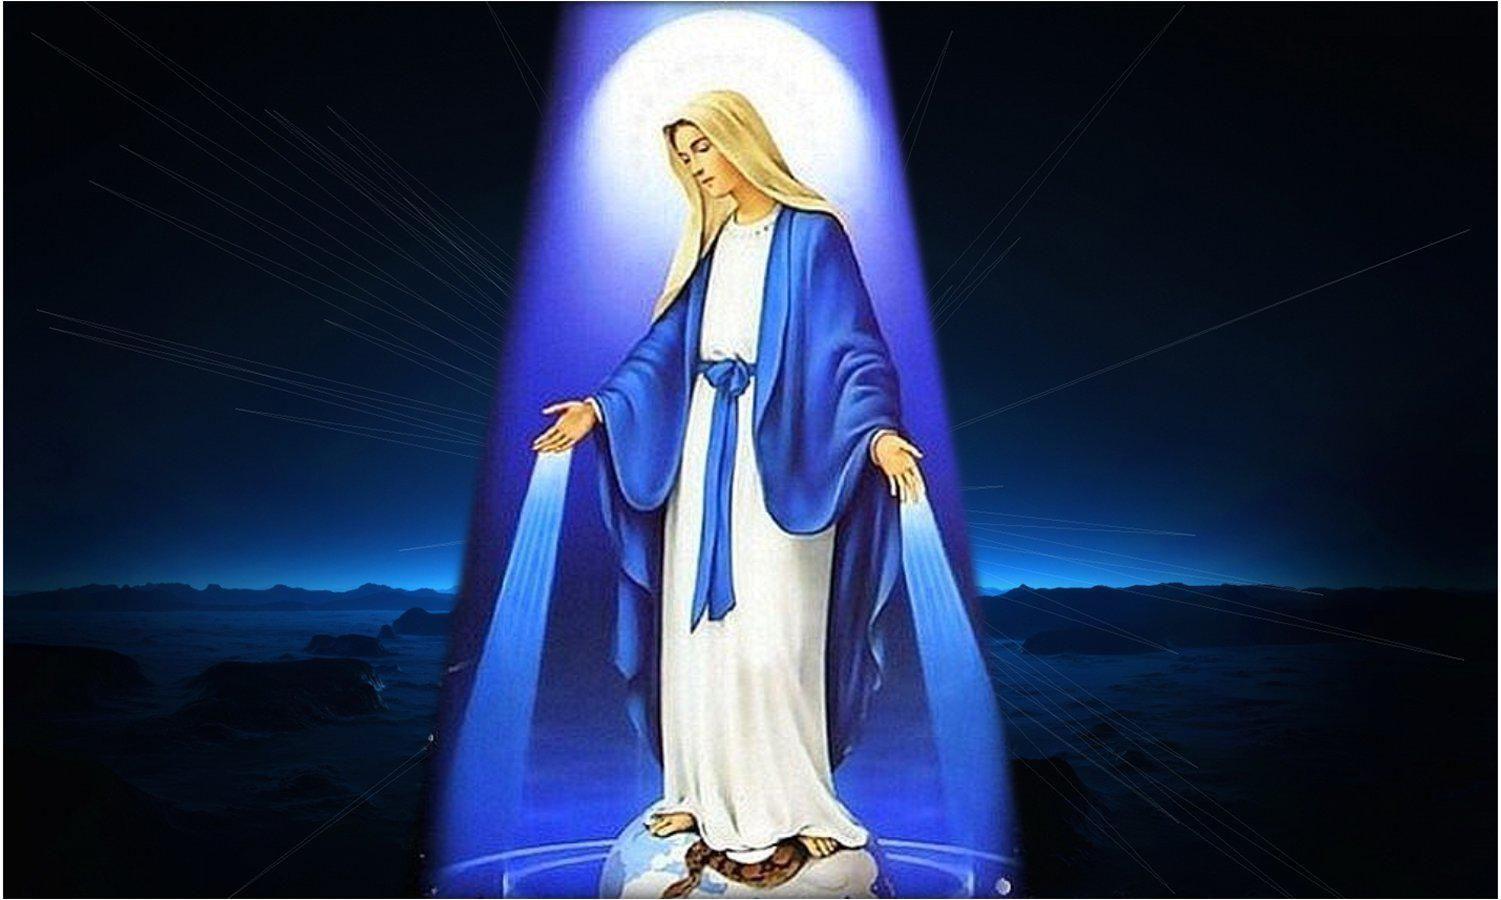 Mother Mary HD Wallpapers - Wallpaper Cave